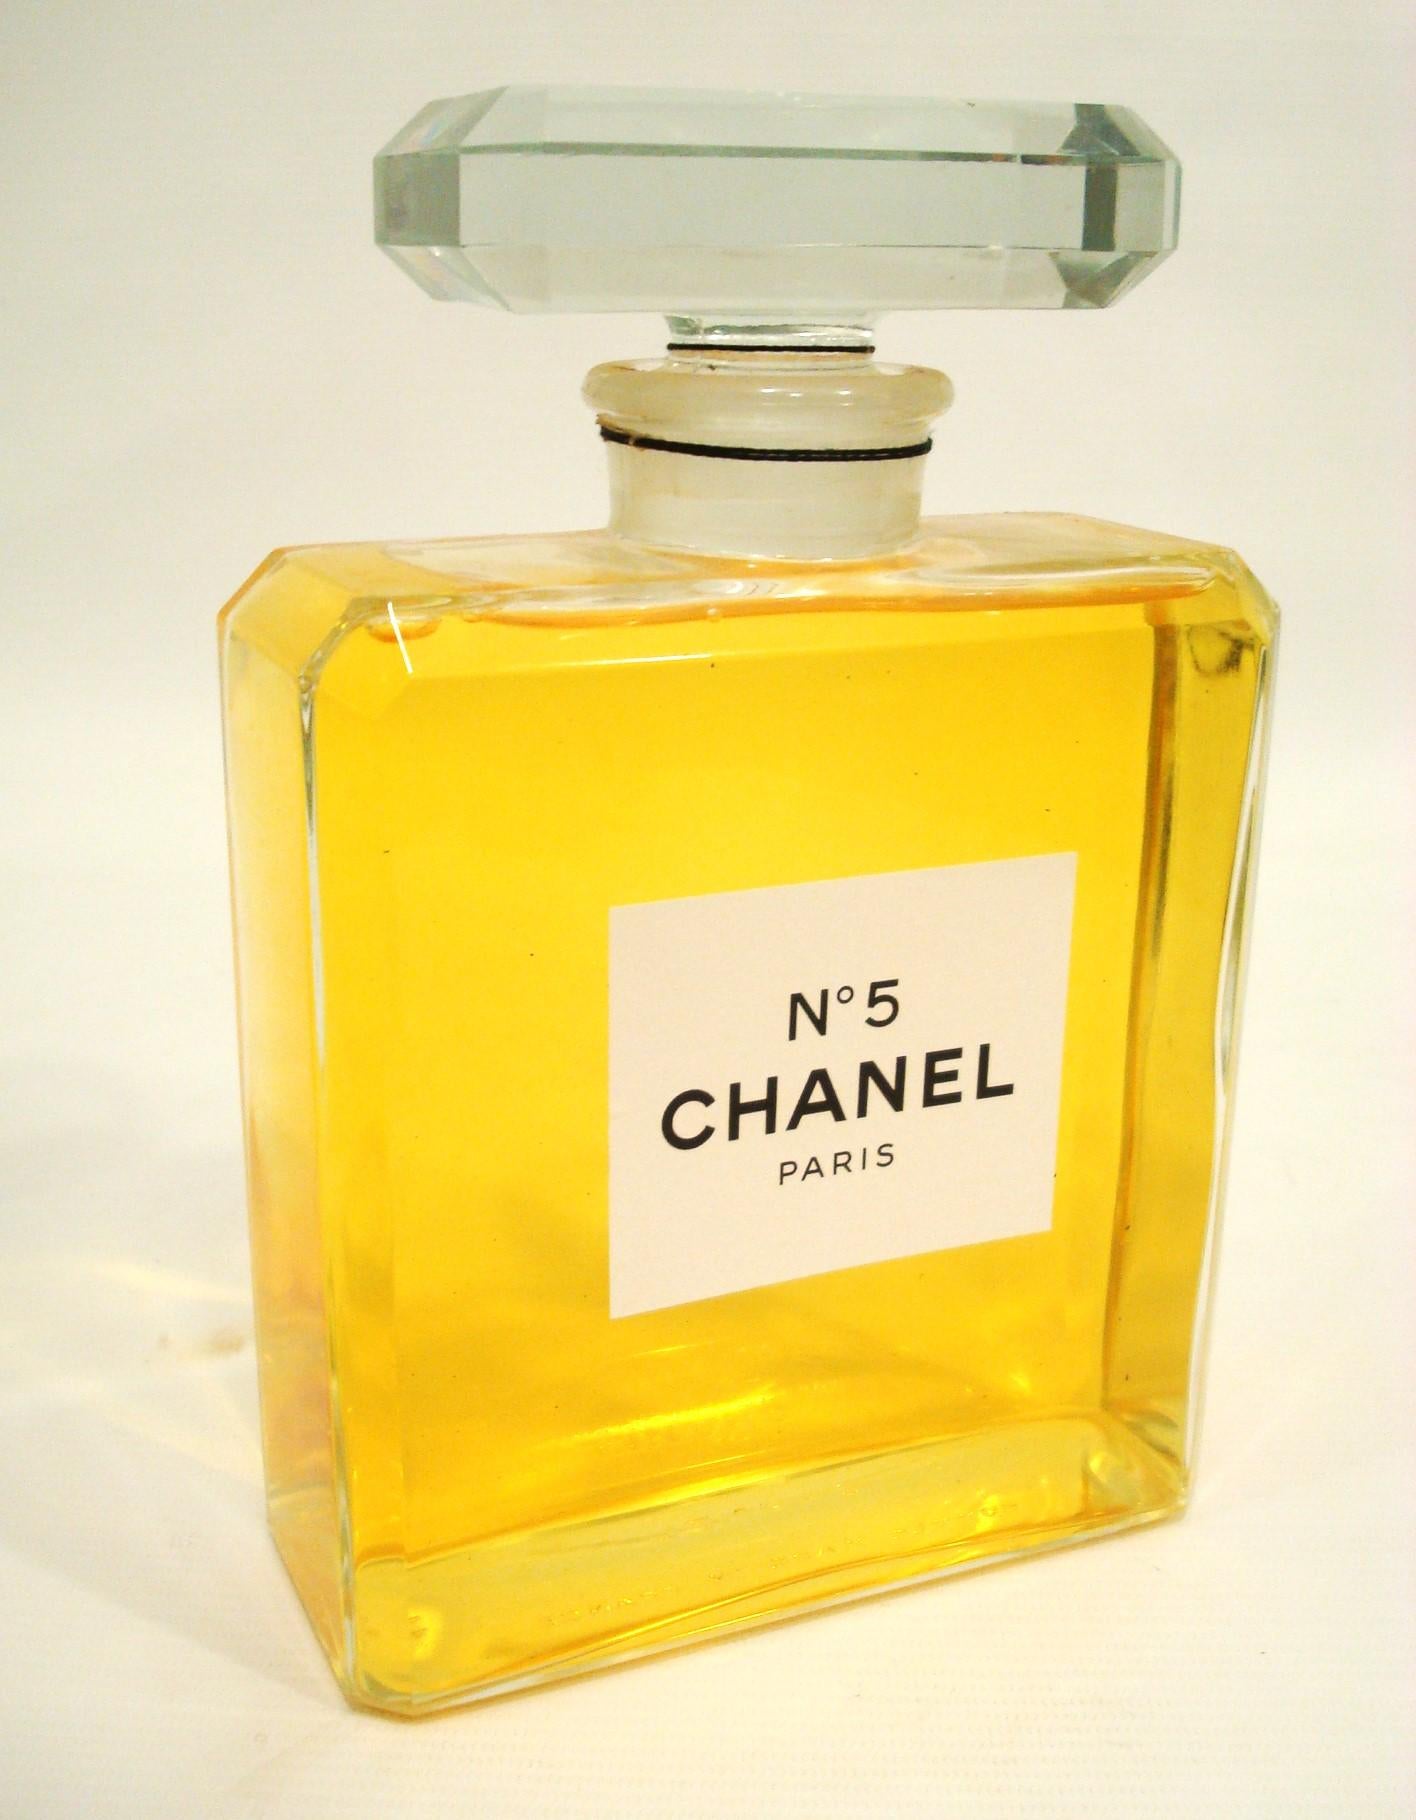 Chanel N5 Huge Store Display Perfume Bottle Advertising, France, 20th Century For Sale 3